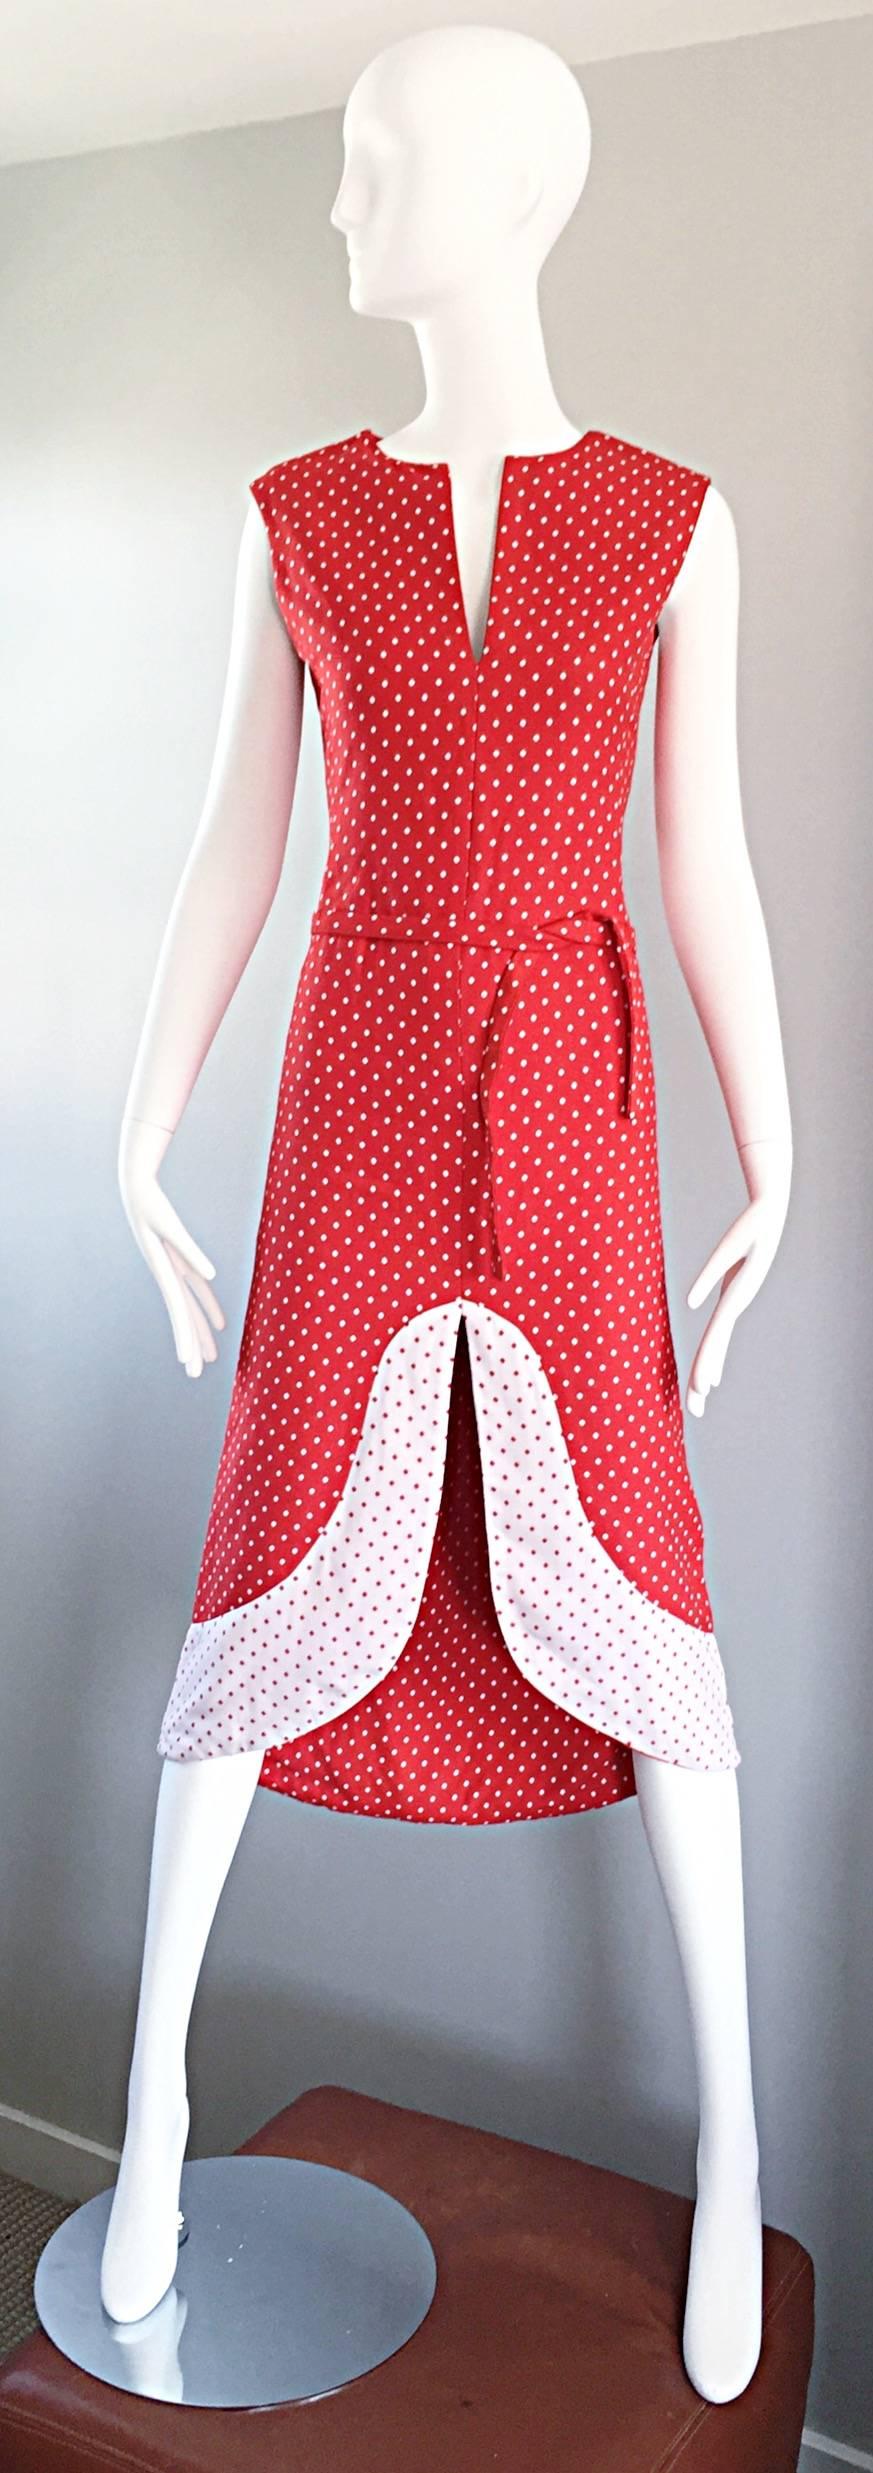 1960s Pierre Cardin Couture Vintage Space Age Red White Polka Dot Cut Out Dress For Sale 2